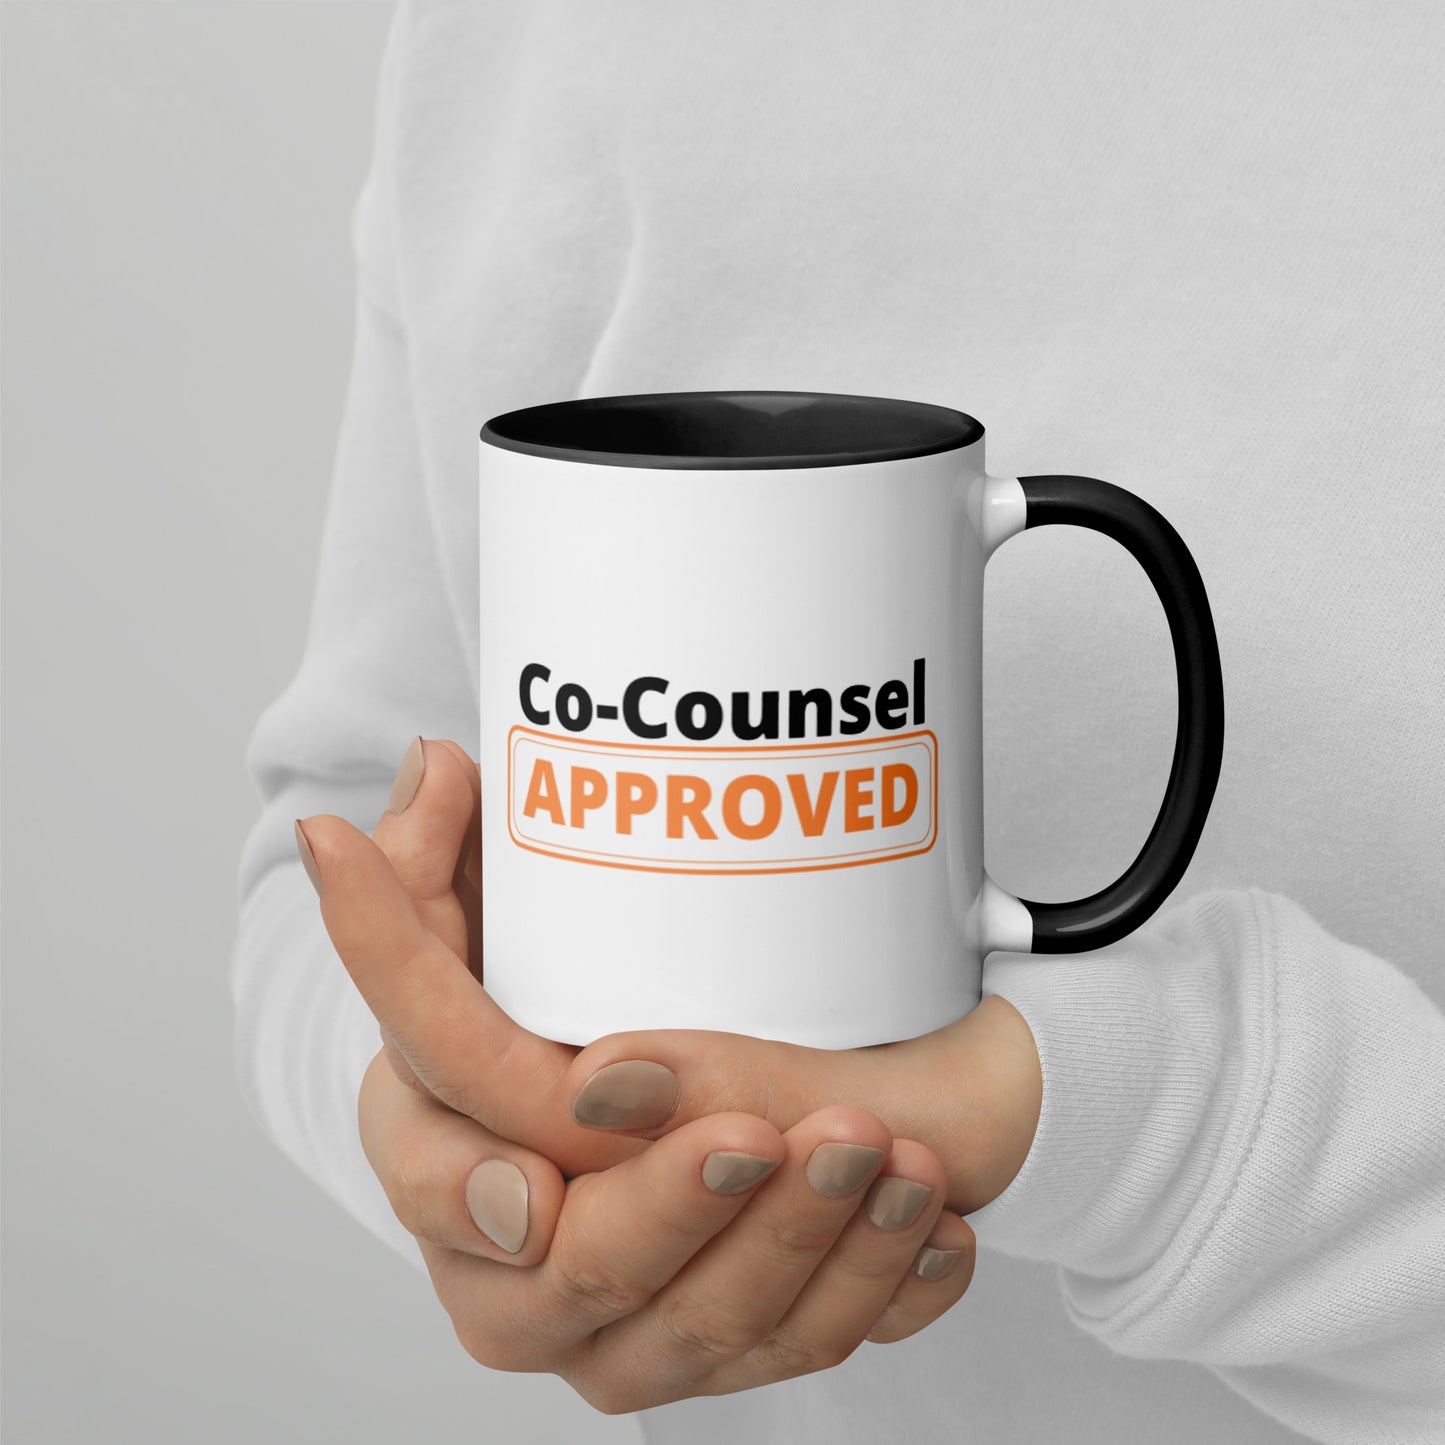 Co-Counsel Approved Mug